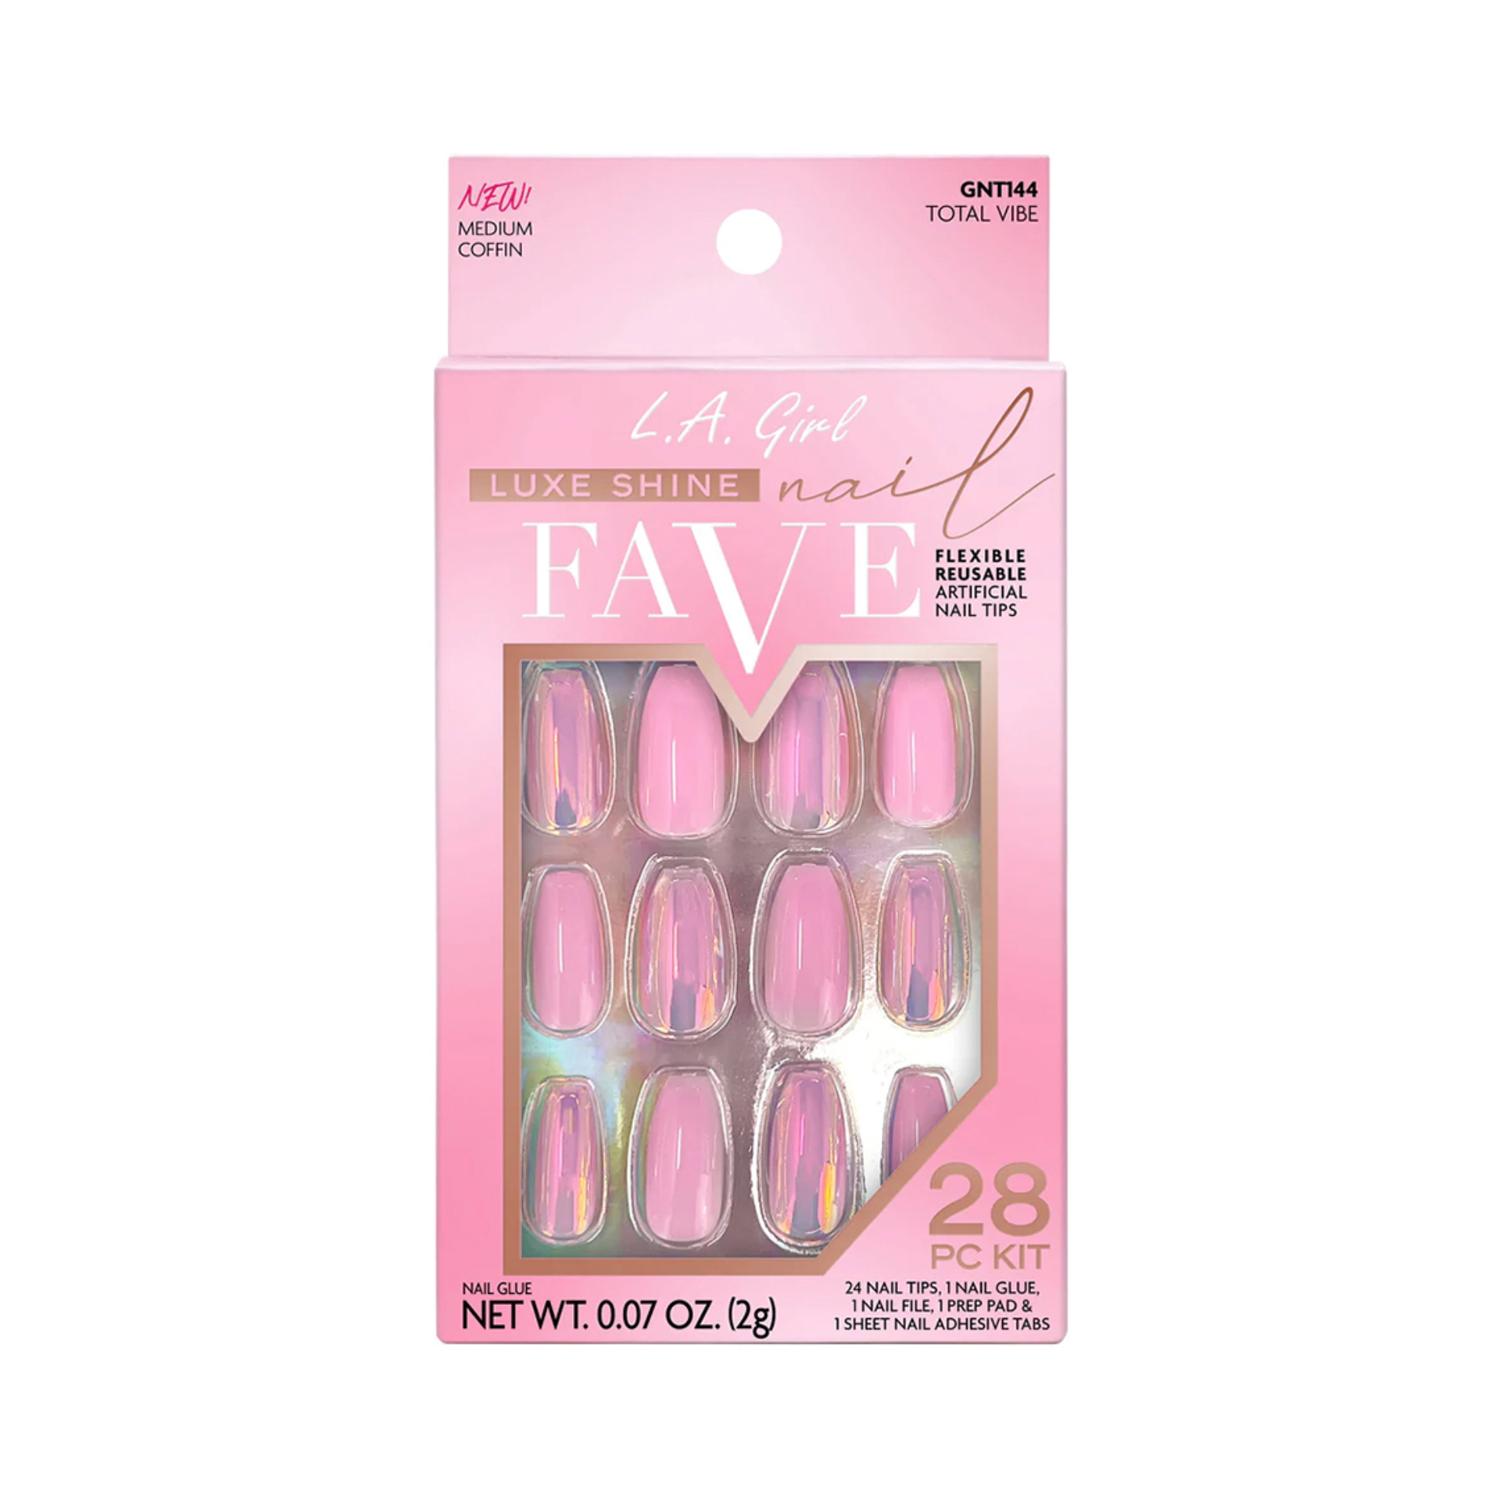 L.A. Girl | L.A. Girl Luxe Shine Nail Fave Artificial Nail Tips - Total Vibe (28 Pcs)